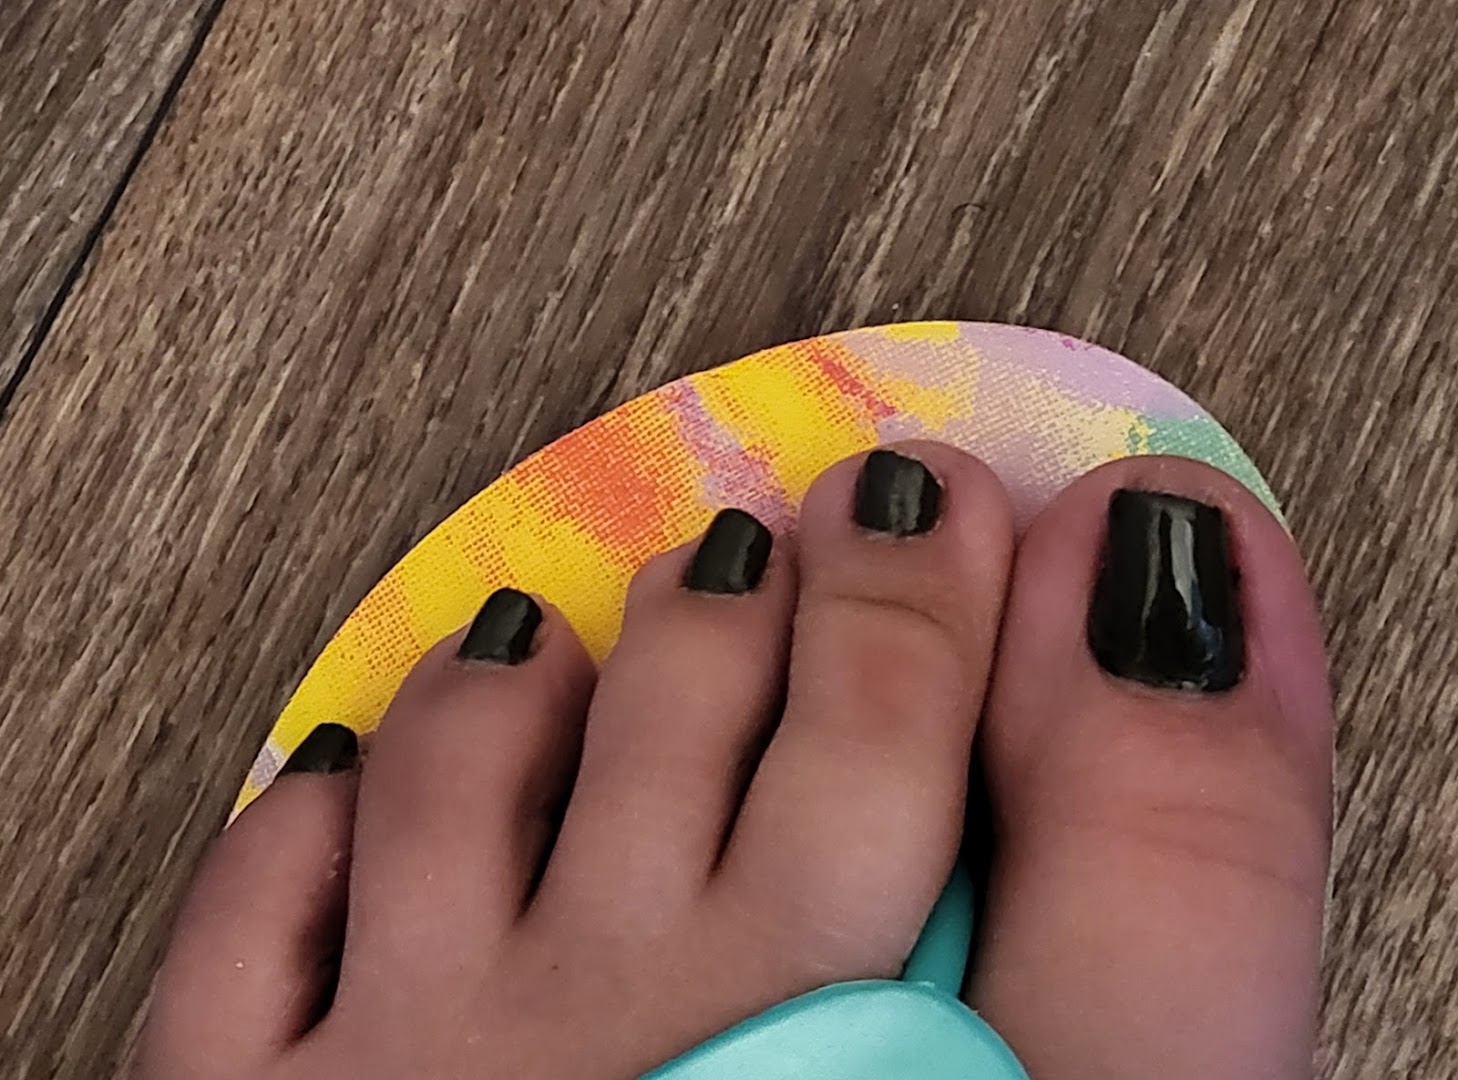 Tips To Toes Salon